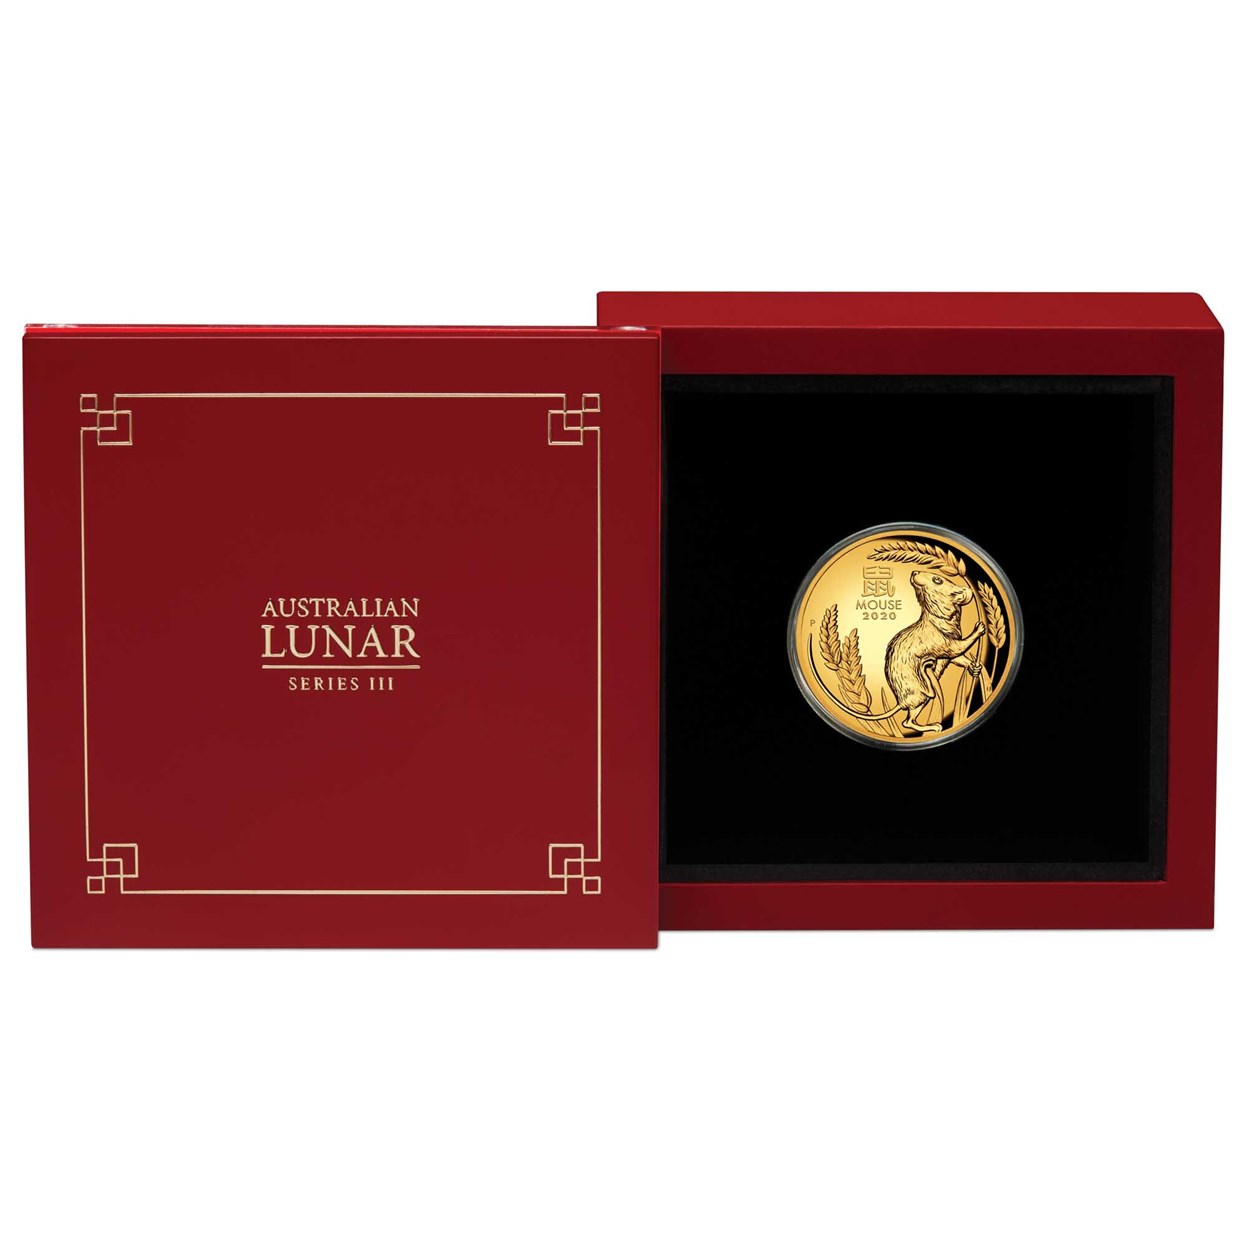 04 australian lunar coin series iii 2020 year of the mouse 2019 1oz gold proof high relief InCase